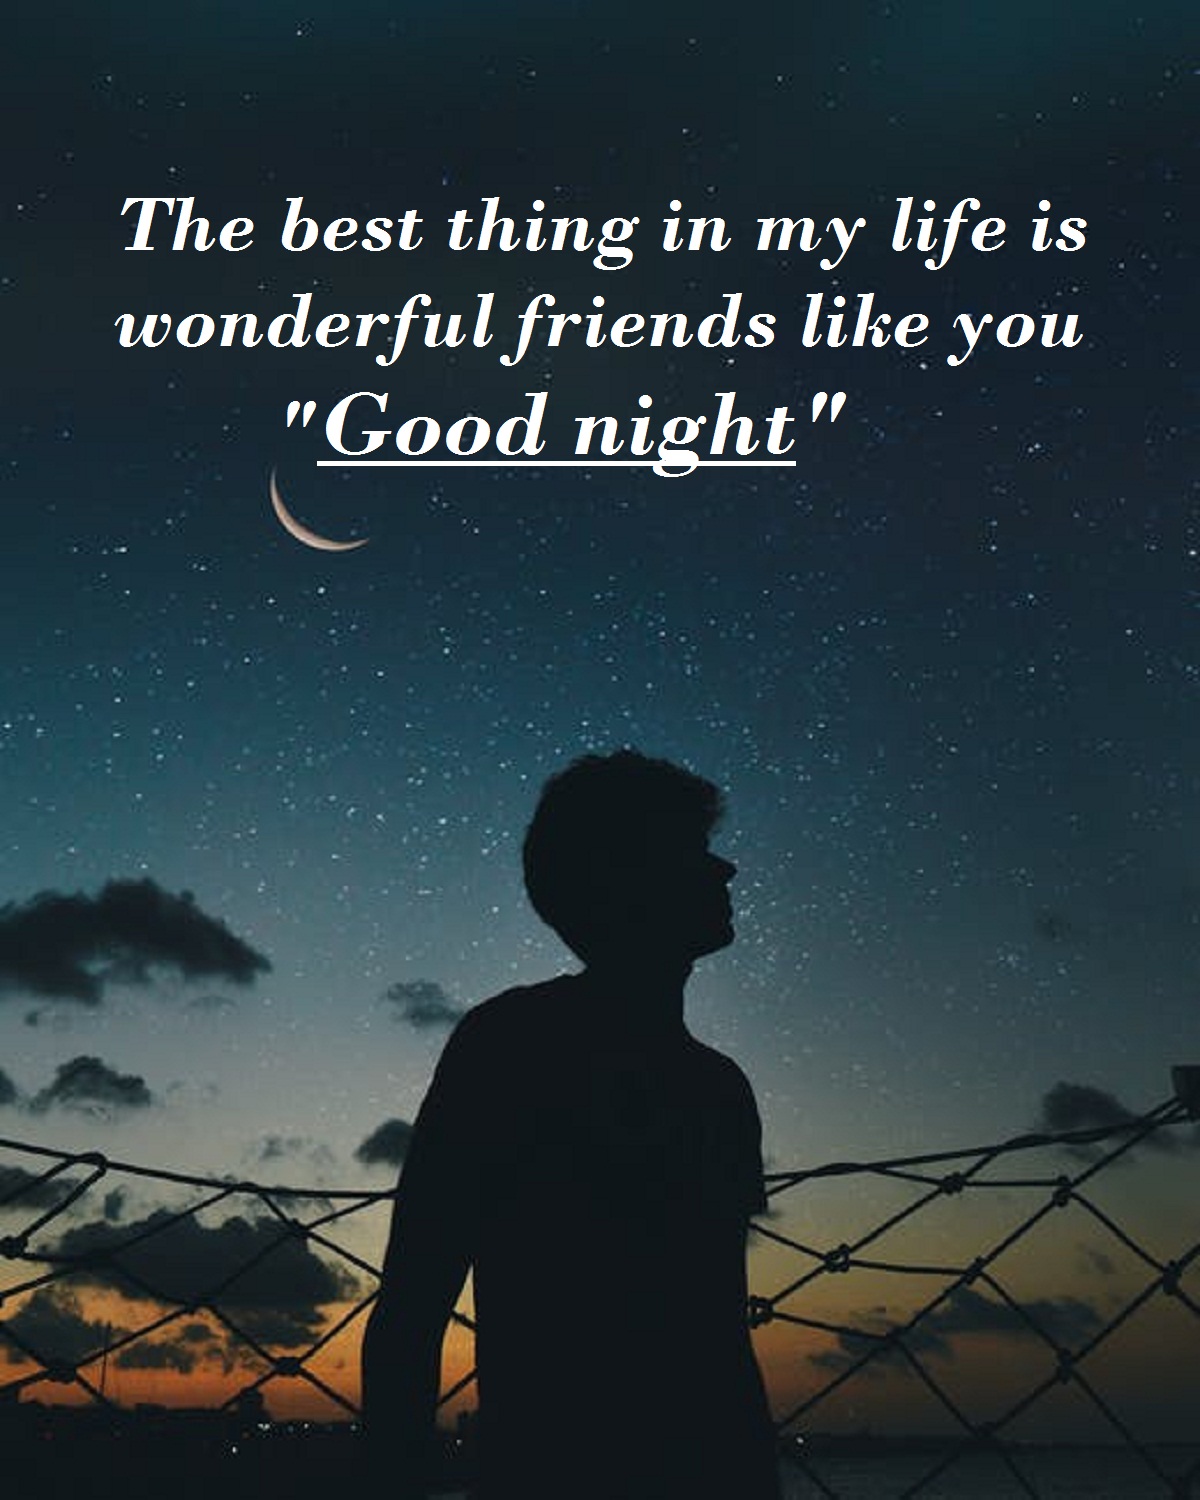 Good Night Love GIF, Quotes, Wishes Images